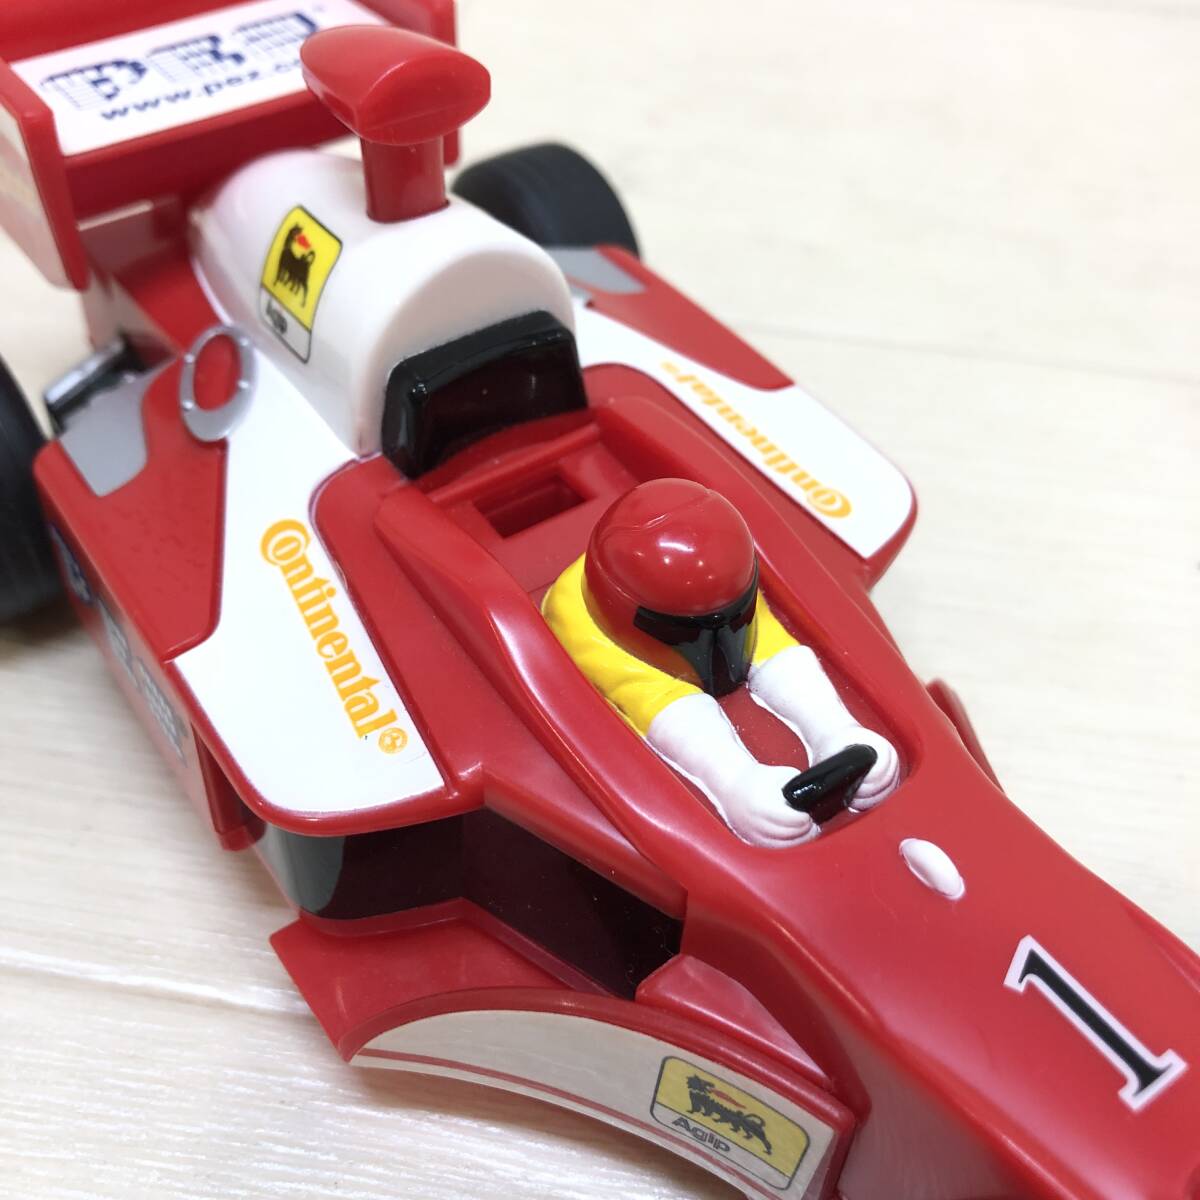 ^PEZpetsu candy - dispenser pullback minicar racing car F1 toy miscellaneous goods collection ^C73722